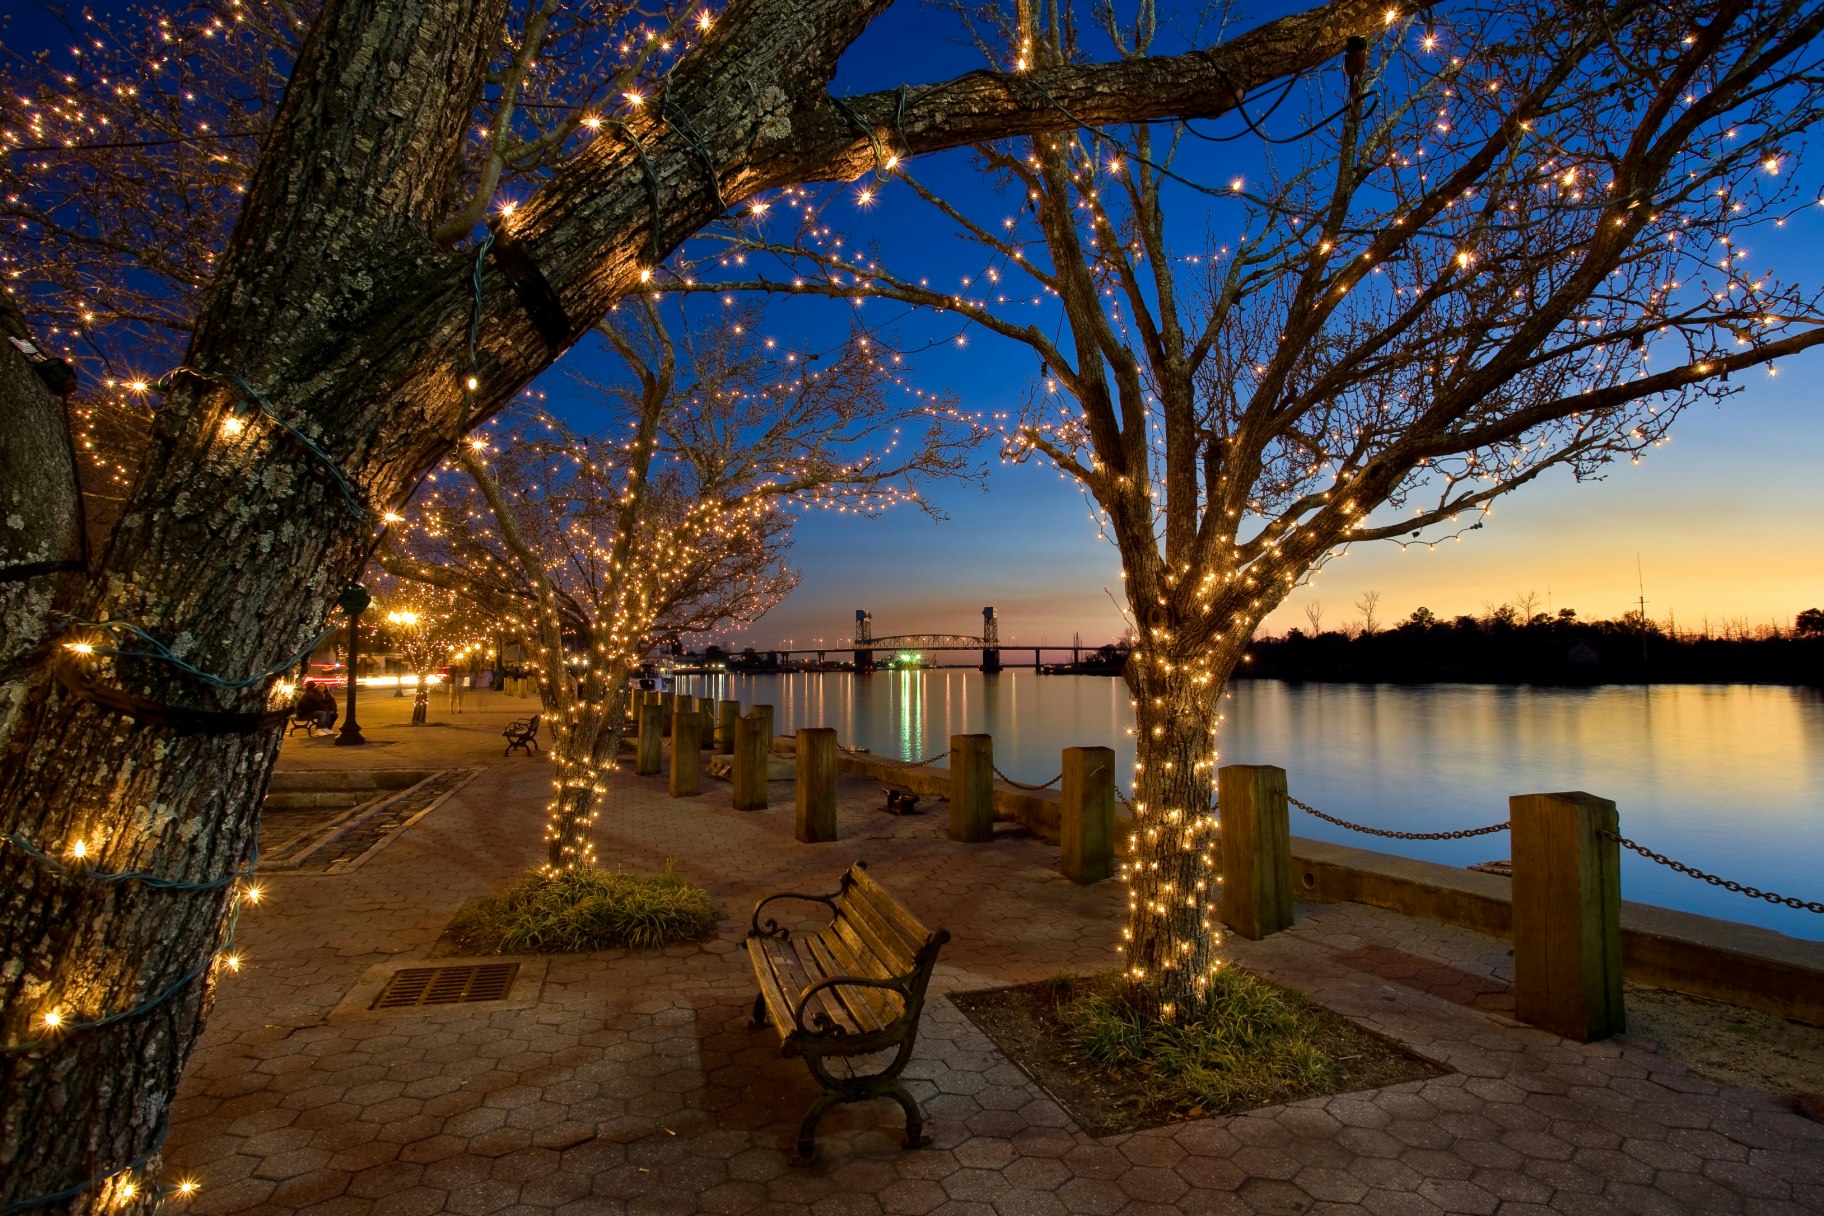 Lights wrapped around tress at riverfront district, Wilmington